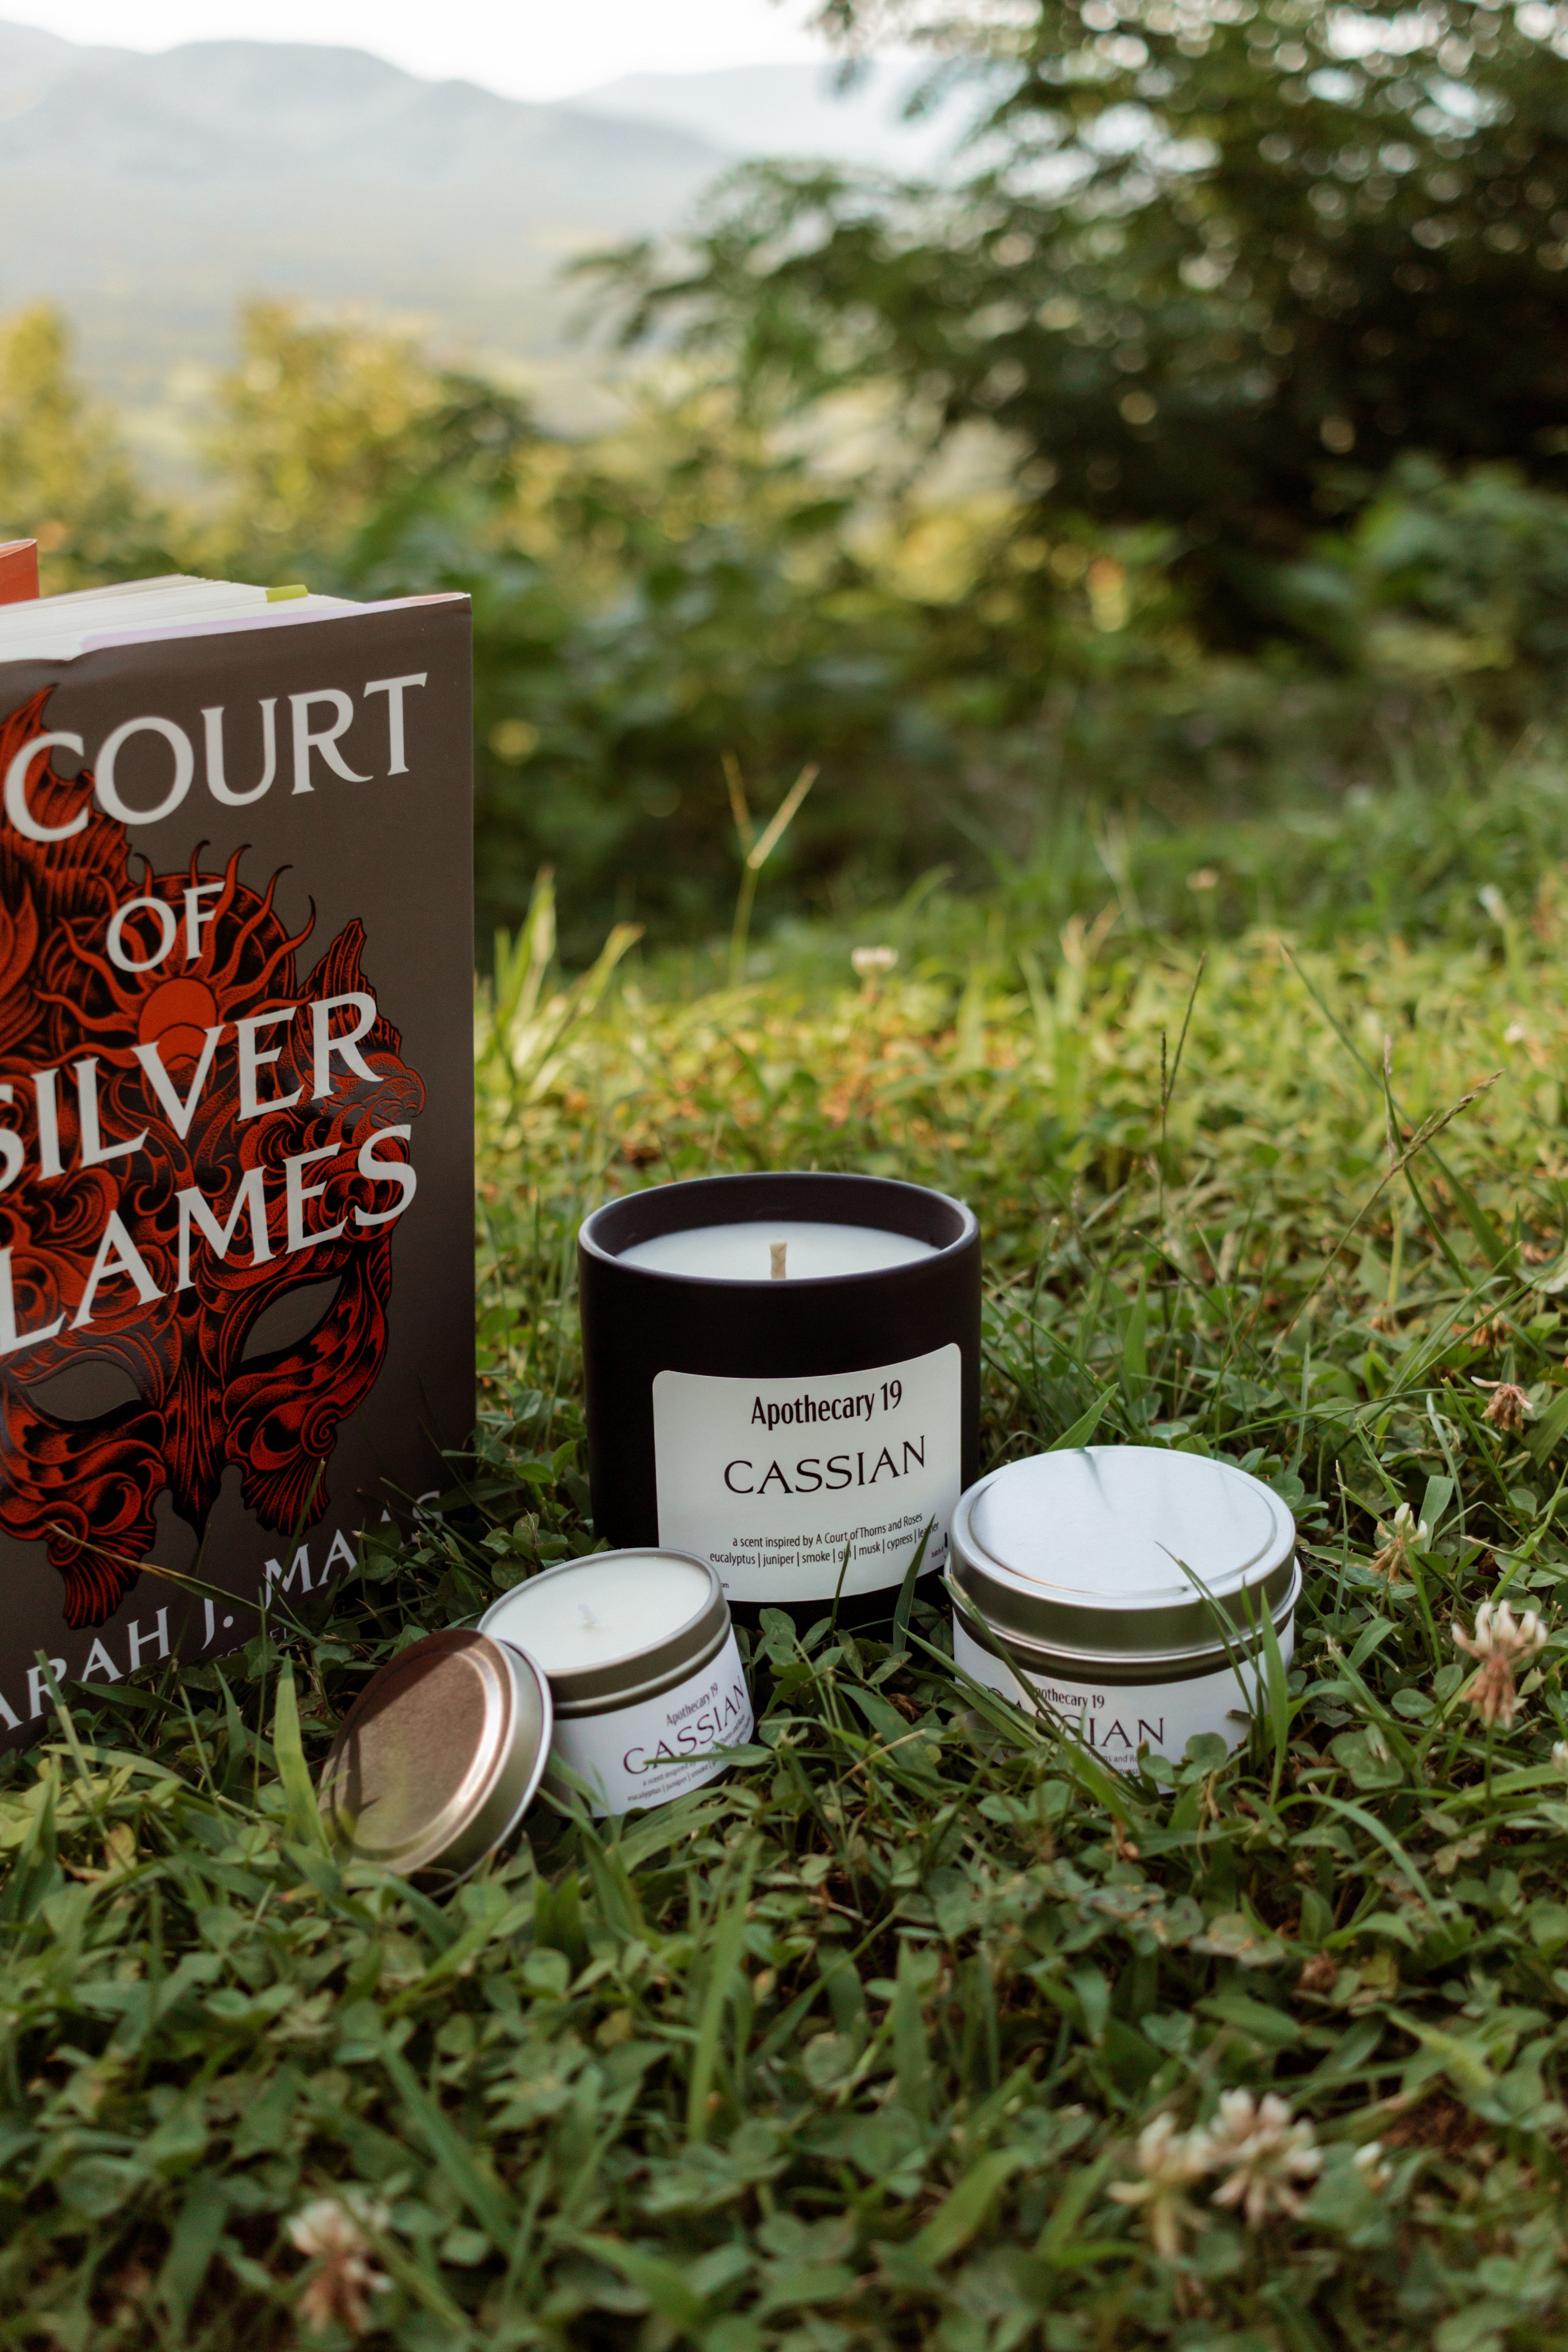 Cassian - an Officially Licensed Candle Inspired by A Court of Thorns and Roses